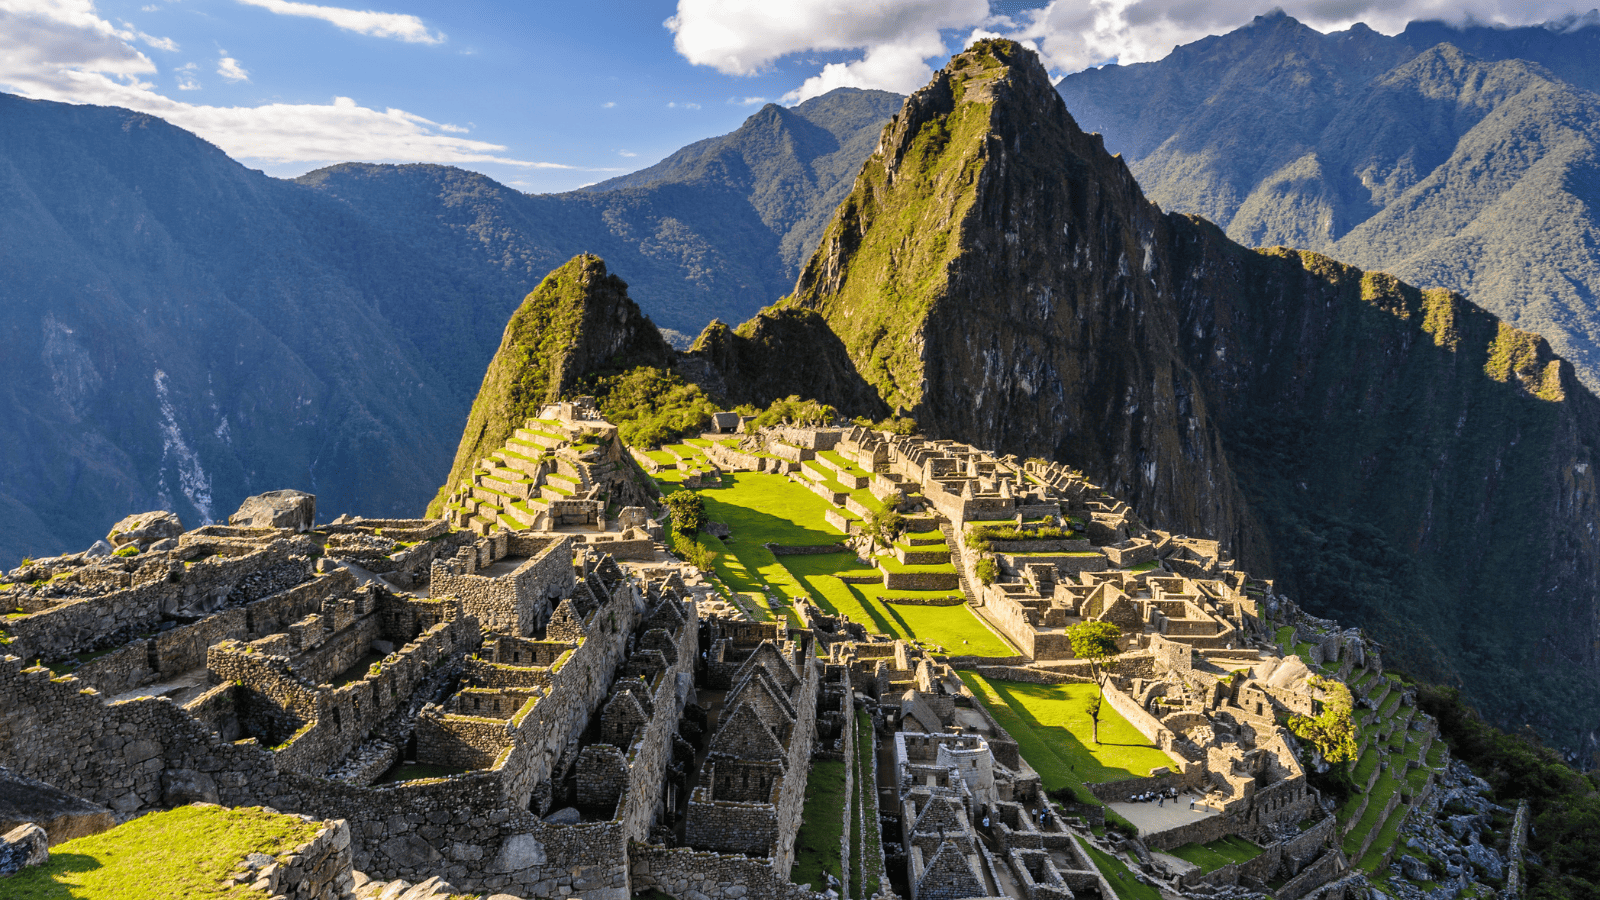 <p>Drawing thousands of people a day as Peru’s most popular tourist attraction, Machu Picchu is another landmark suffering from large numbers of visitors. The erosion of stone buildings in the citadel is a direct result of overcrowding, resulting in many sections being closed off to aid in conservation.</p>